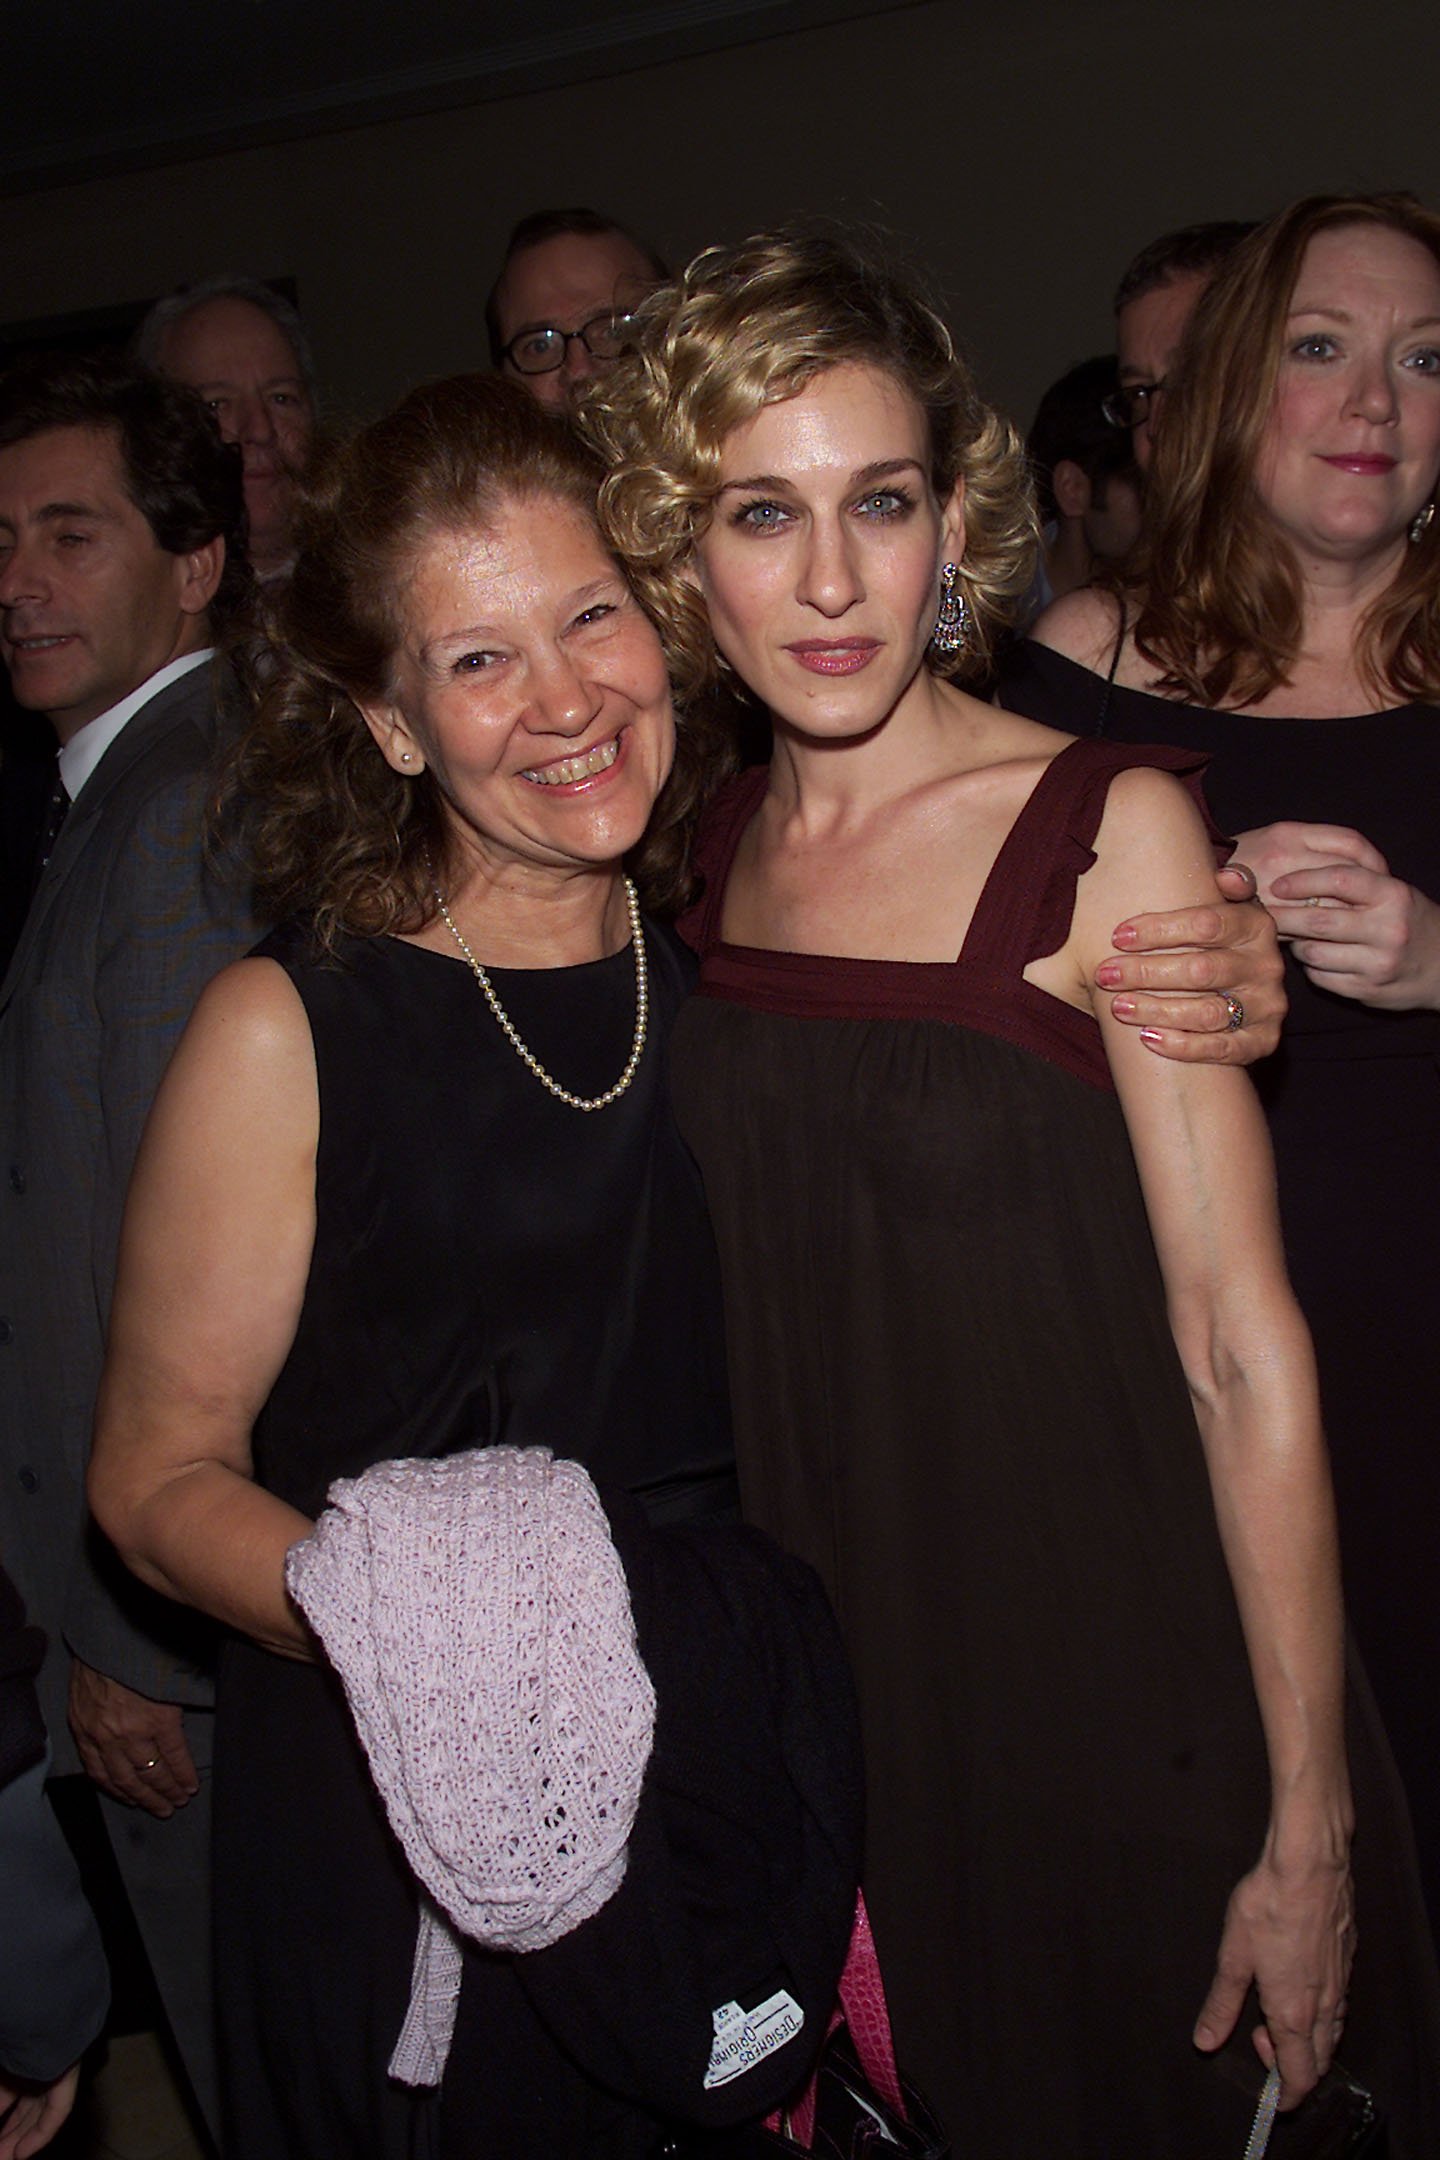 Barbara Forste and Sarah Jessica Parker at the "Wonder Of The World" opening night after-party in New York City on November 1, 2001 | Source: Getty Images